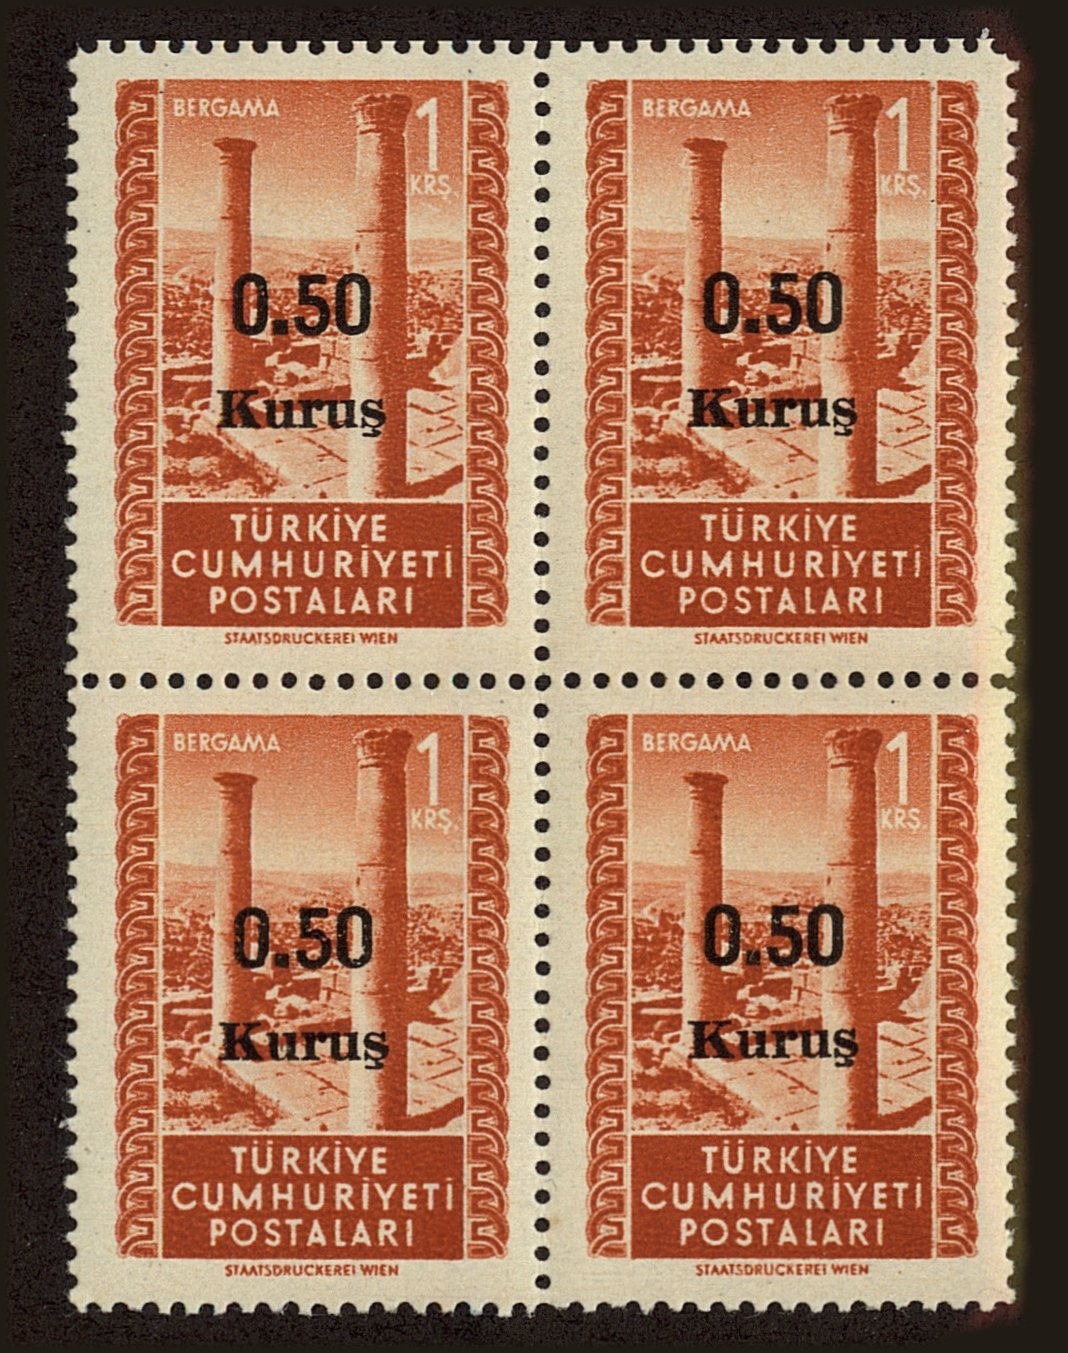 Front view of Turkey 1075 collectors stamp